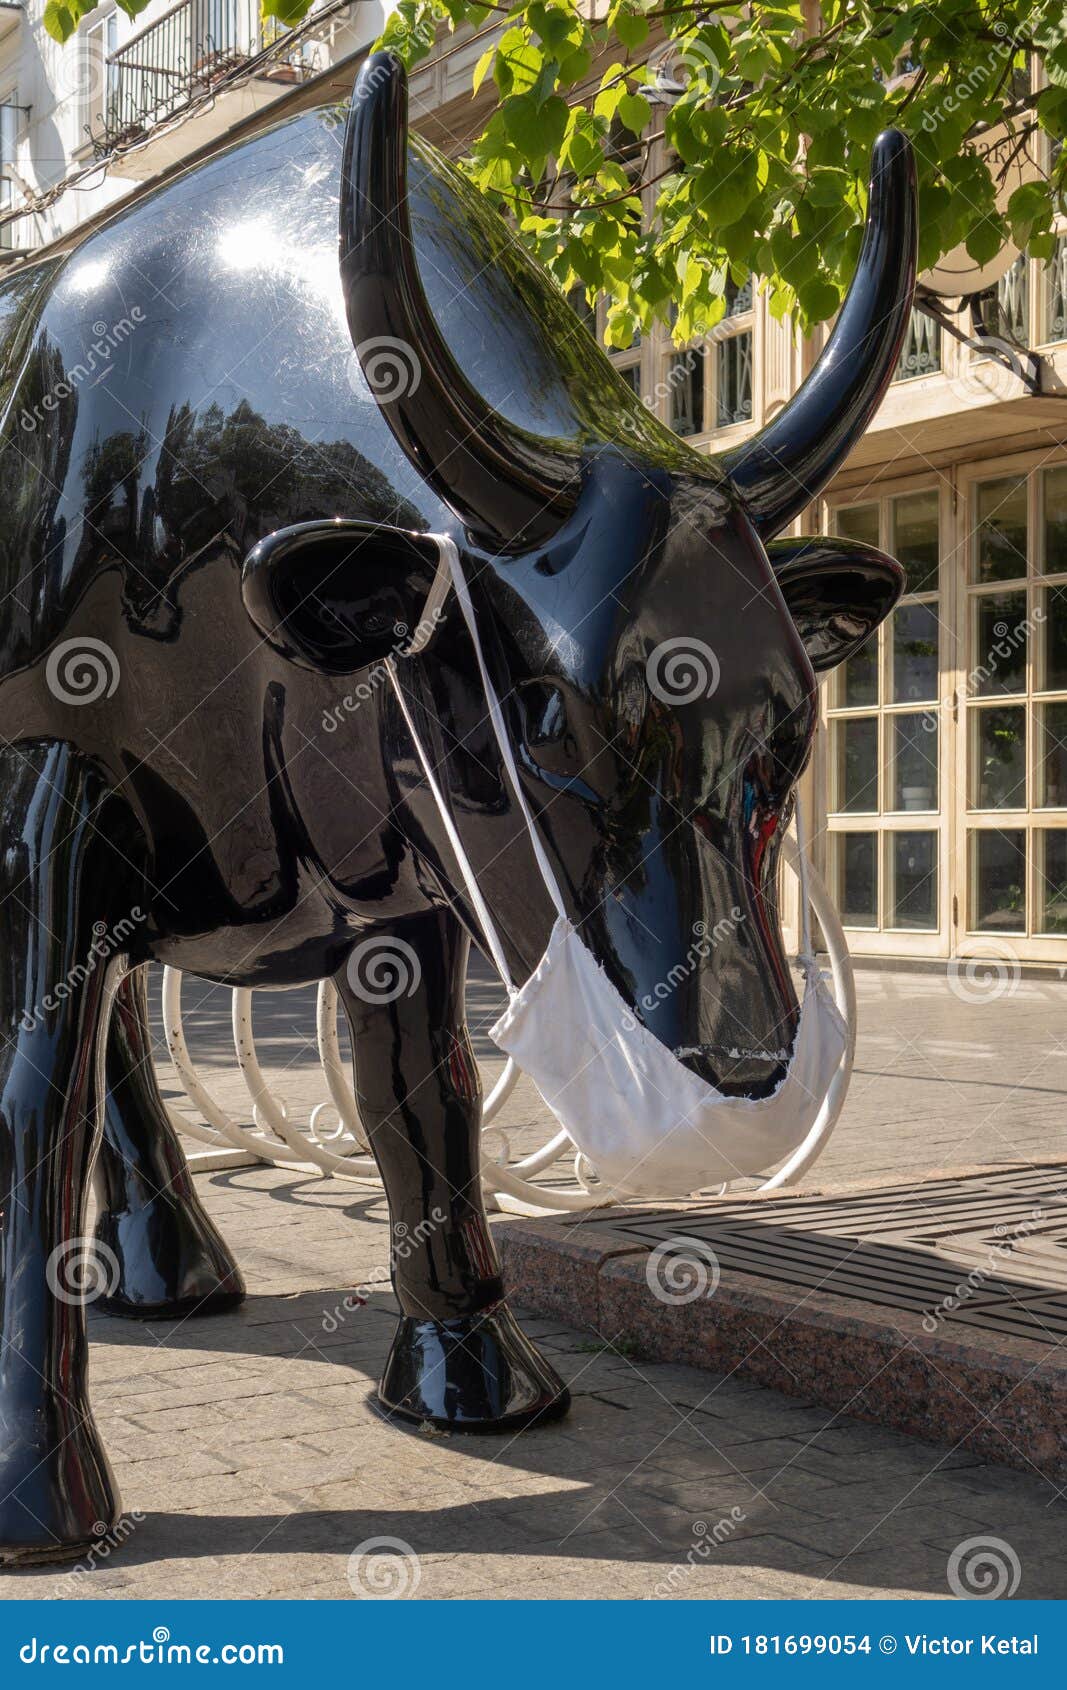 Sham Black Cow in a Surgical Mask. City Life during a Pandemic ...